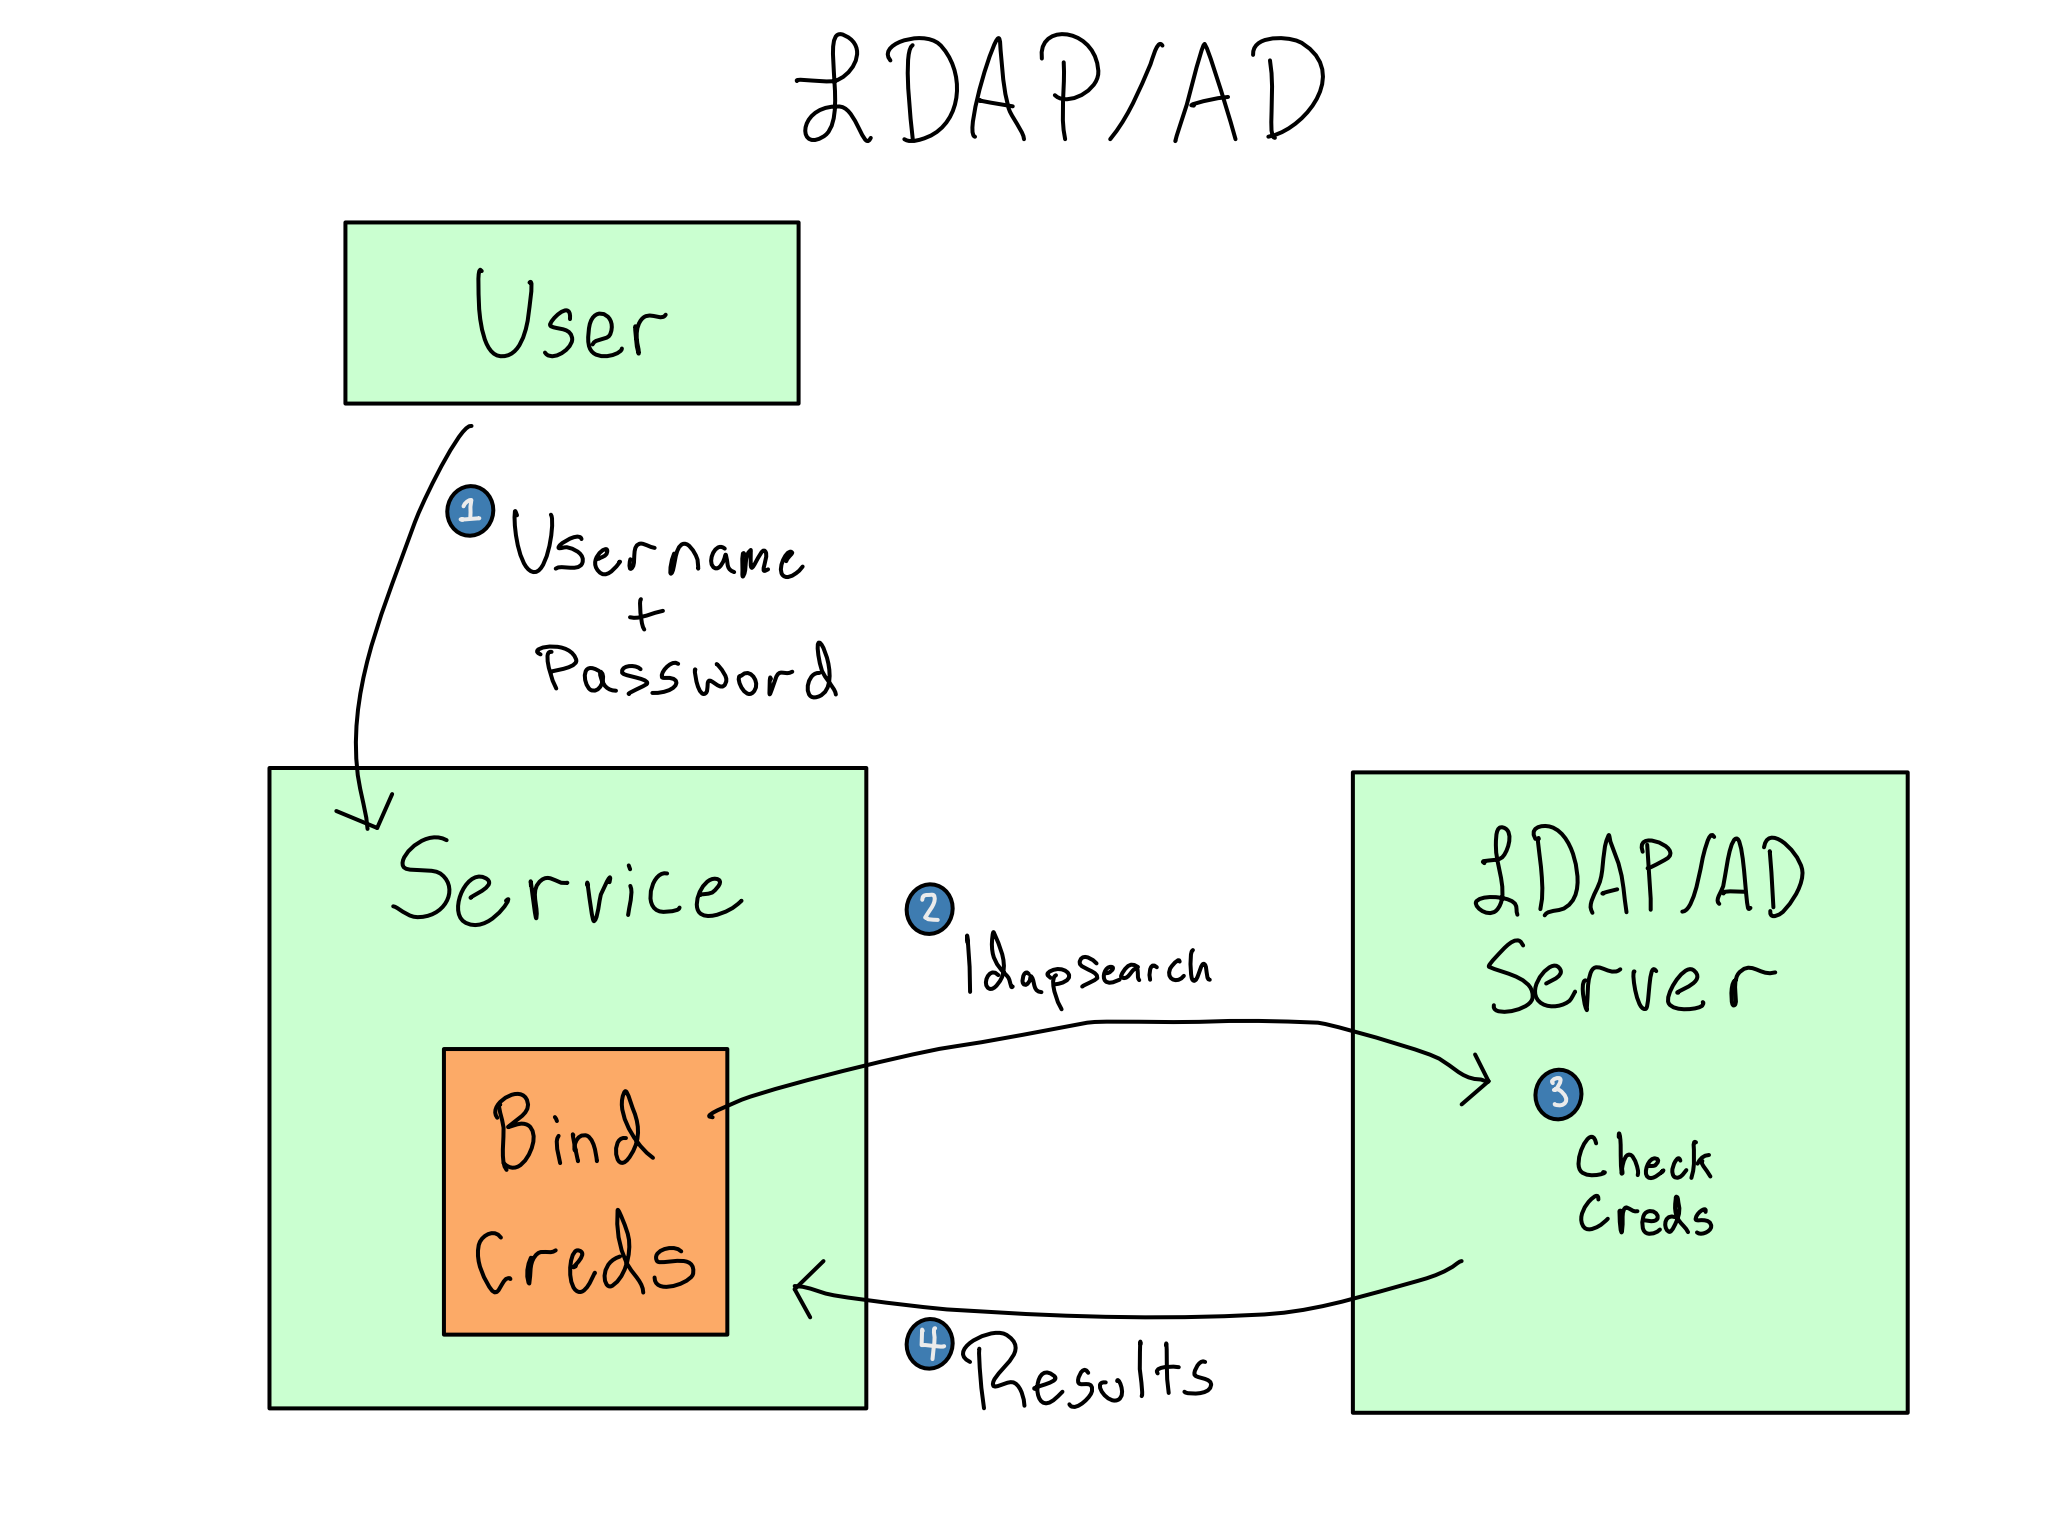 A diagram of the LDAP flow. 1-User provides username and password to service. 2-service sends bind credentials w/ ldapsearch to LDAP server. 3-LDAP server checks credentials. 4-LDAP server returns results to service.